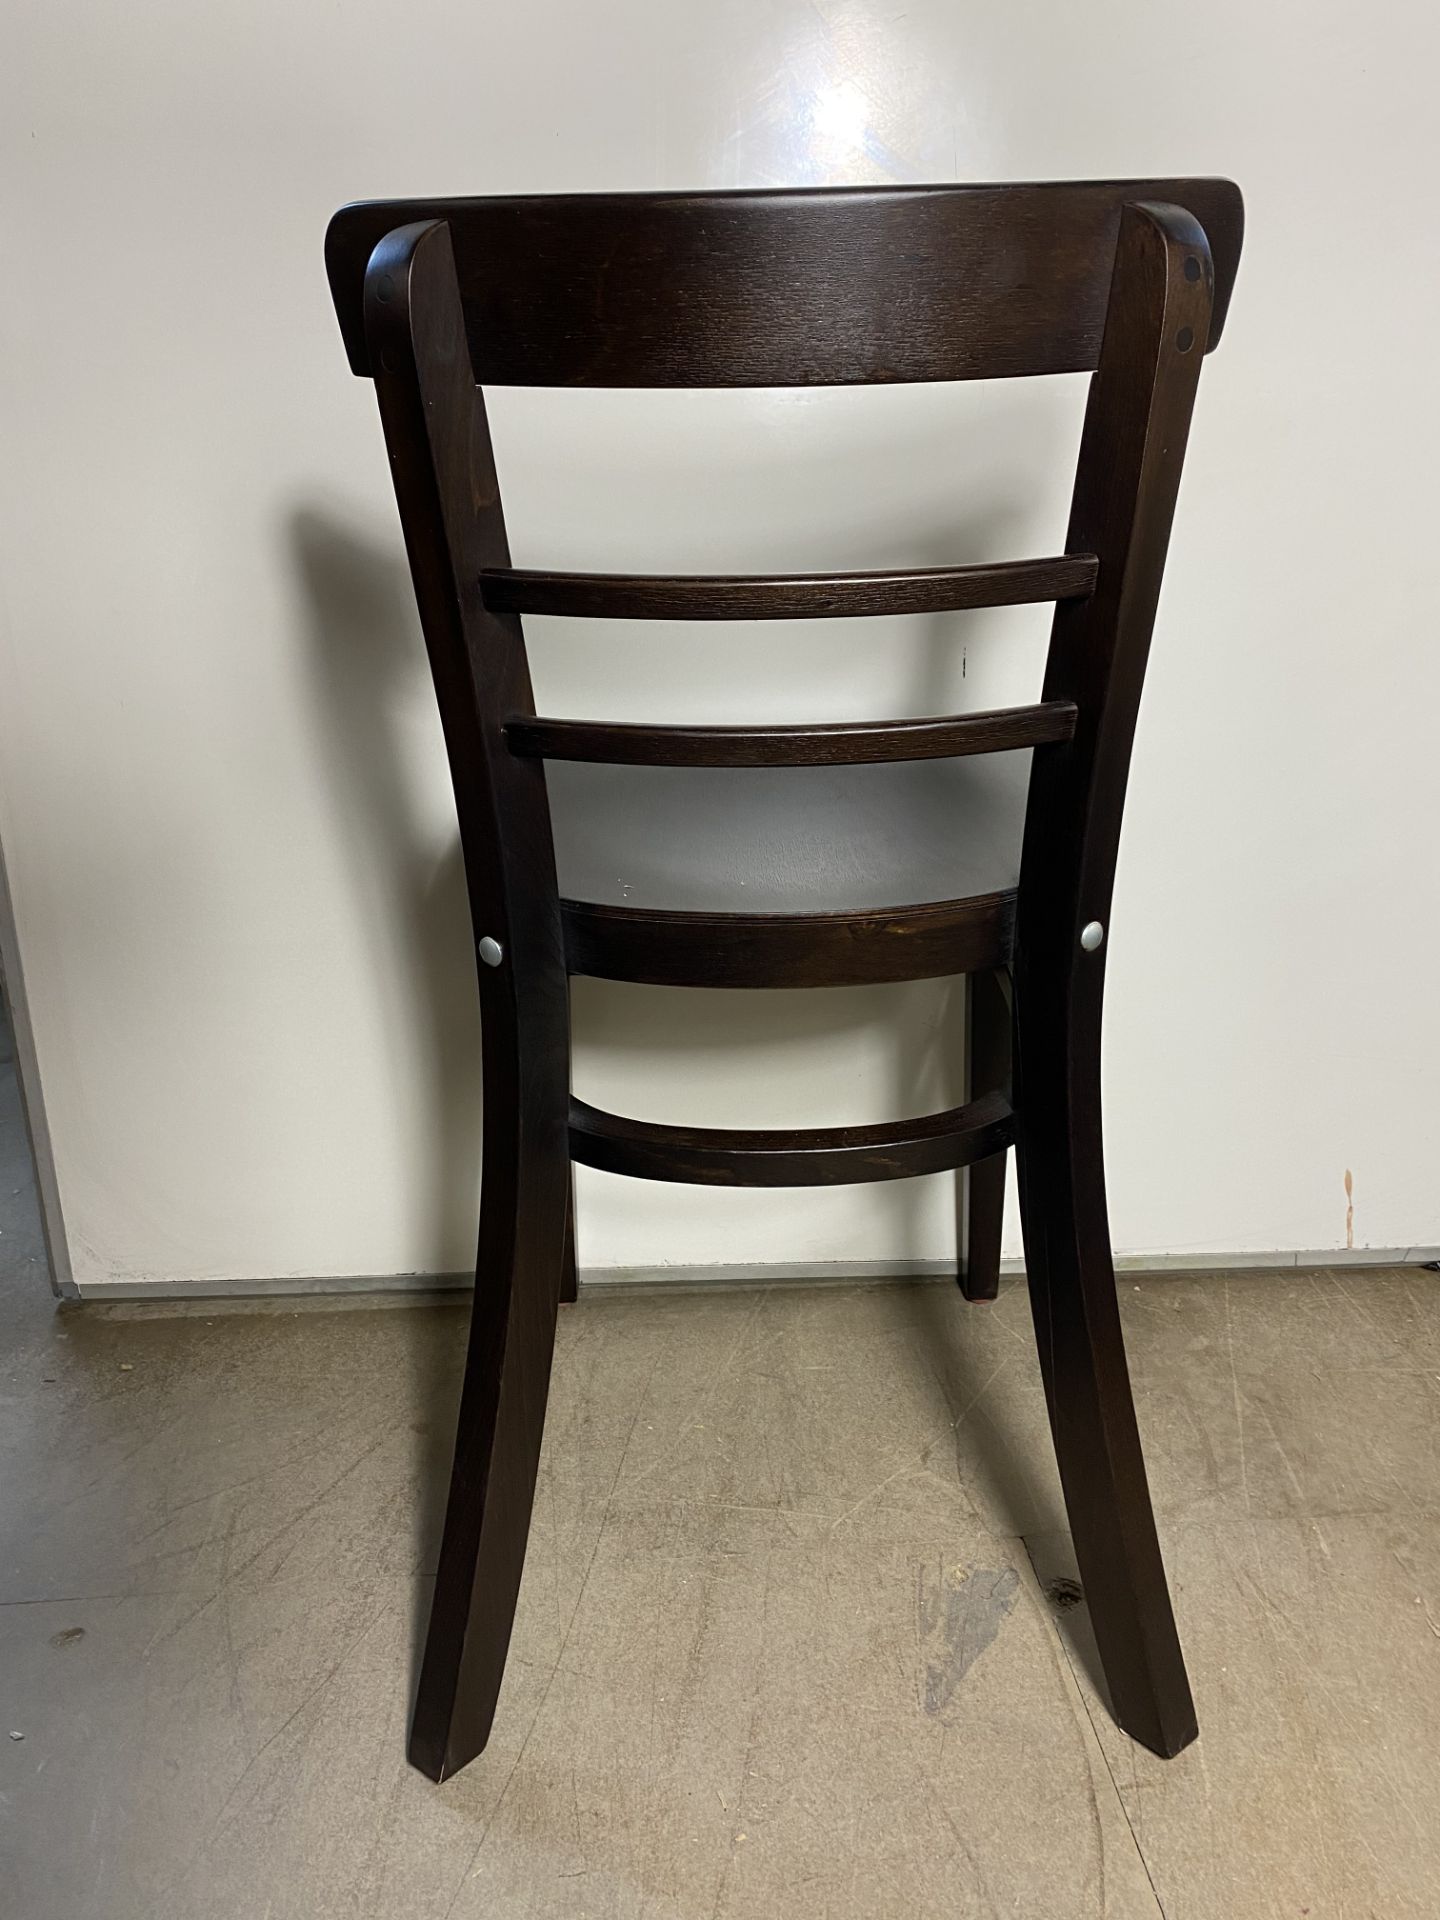 4 x Espresso Side Chairs | BE 3057983 - Image 3 of 5